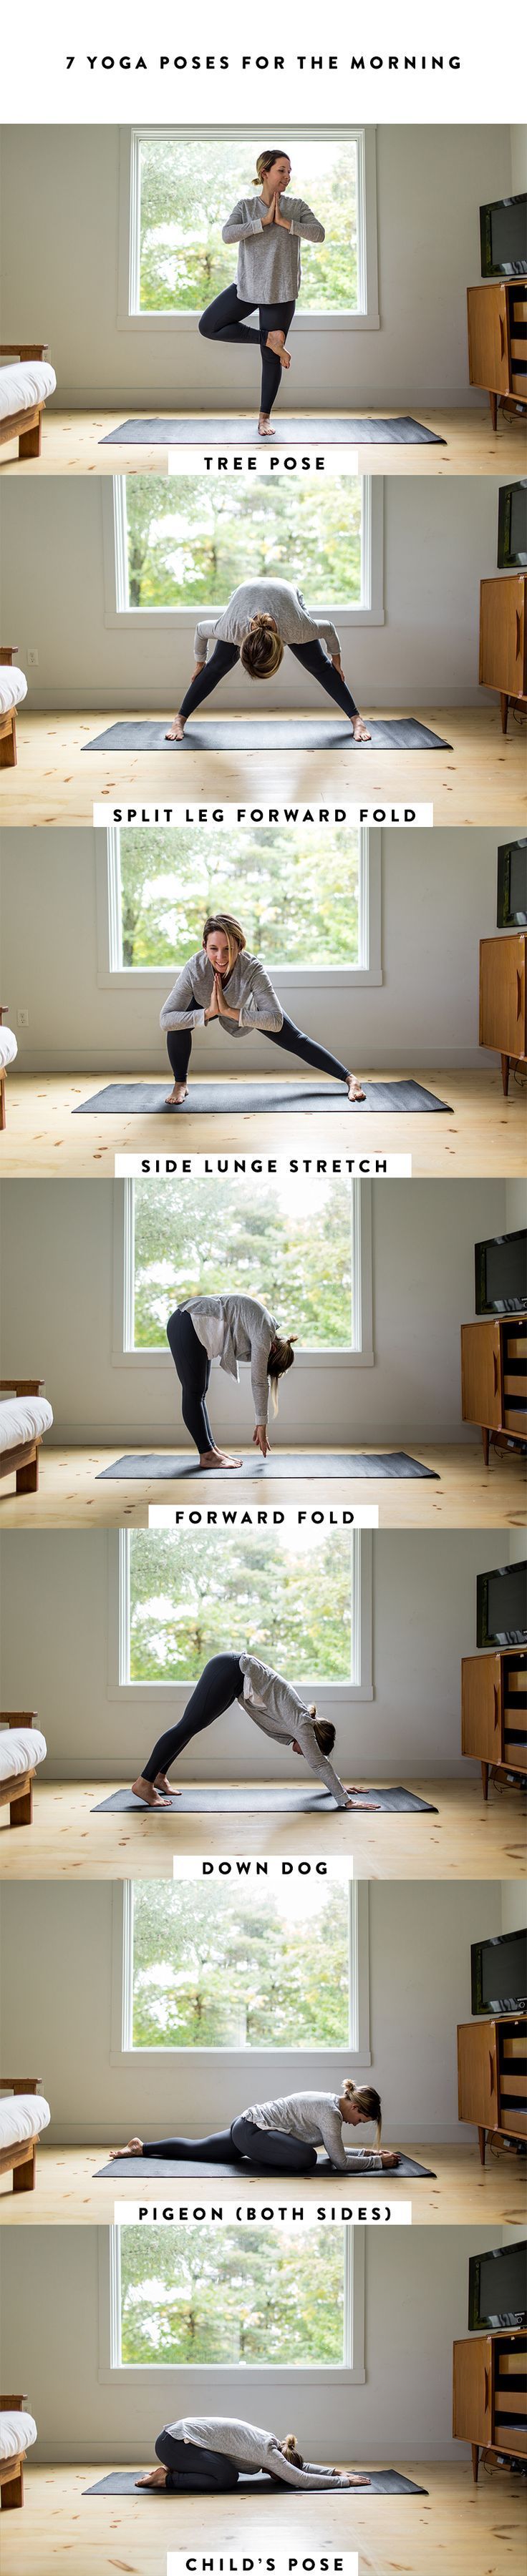 A SImple Morning Yoga Routine to Make the Most of an Extra Hour | The Fresh Exch...